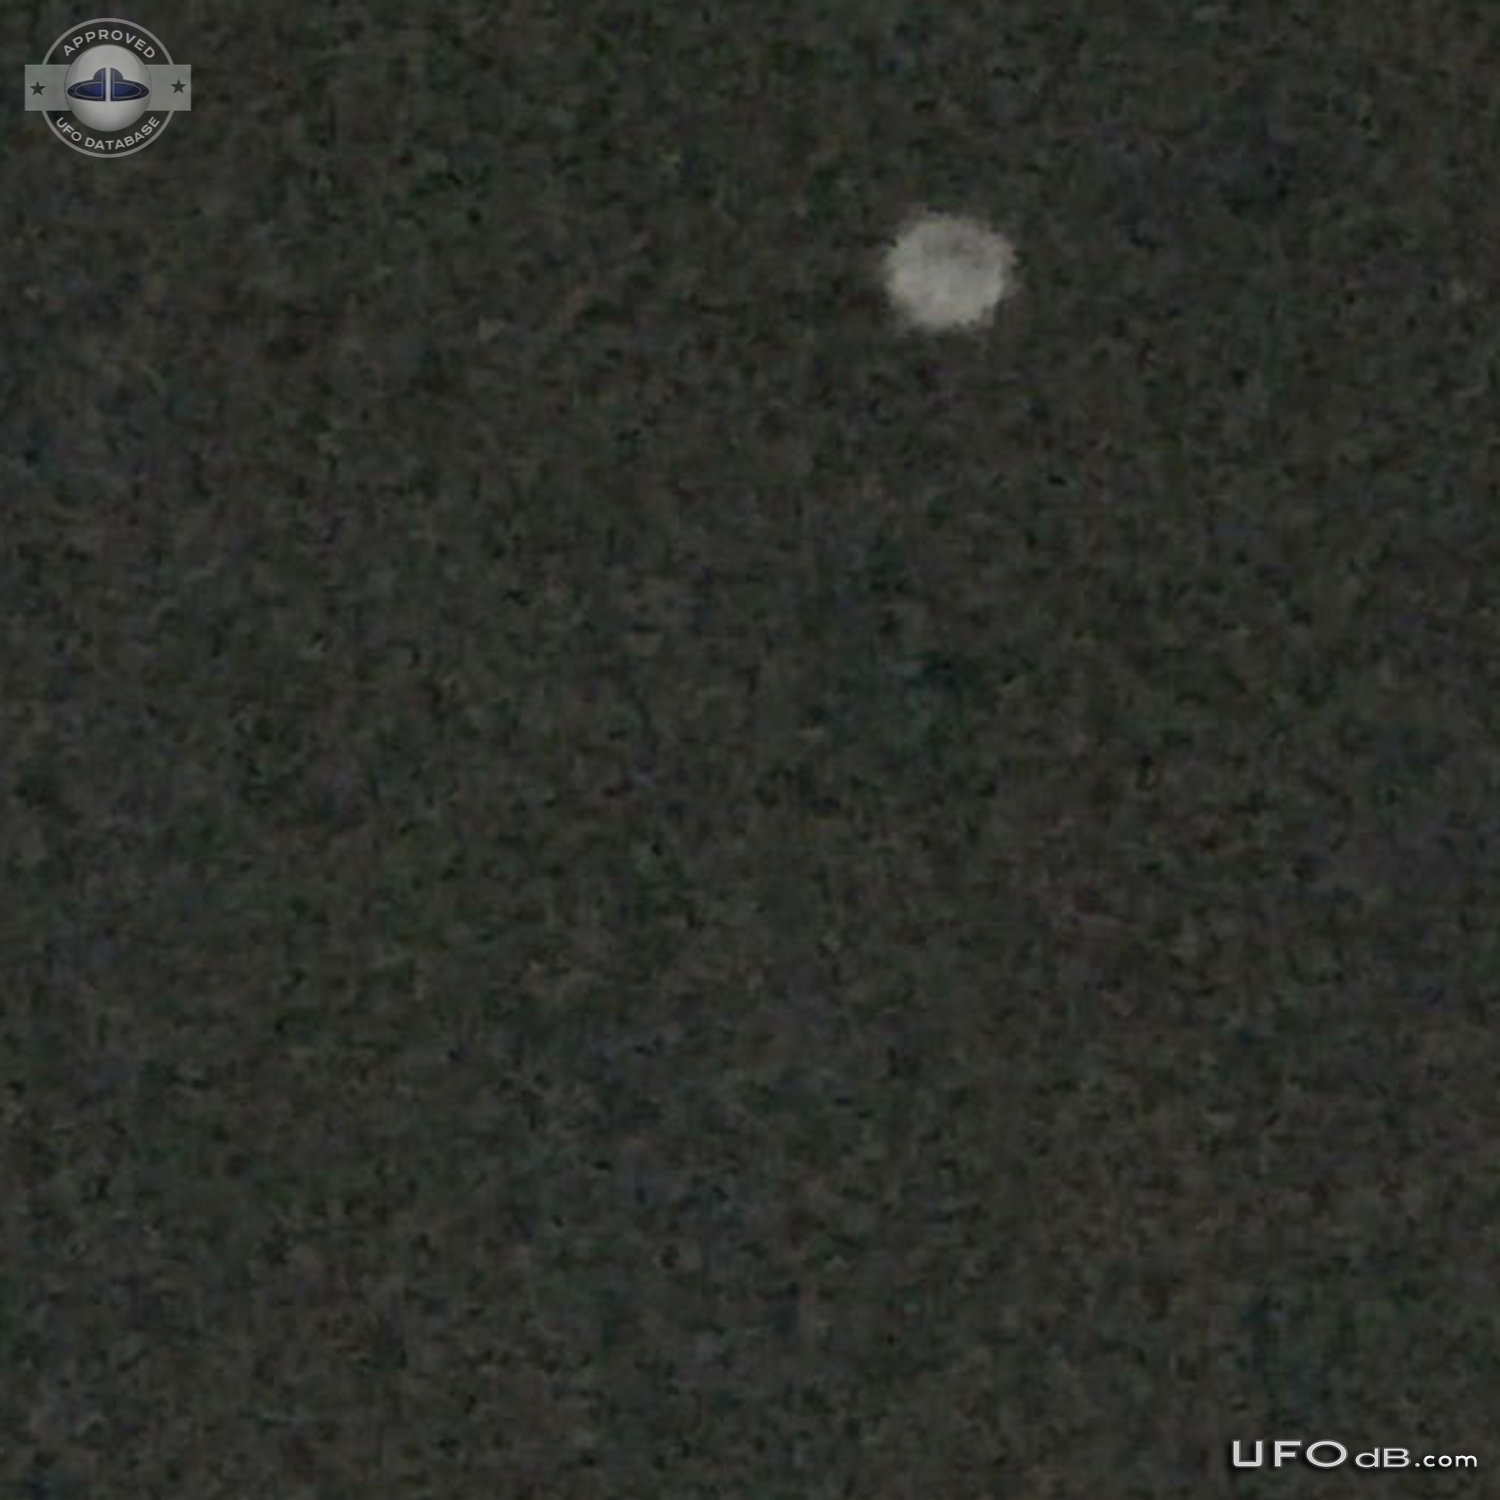 Many hovering UFOs with planes flying around them Weatherford, Texas UFO Picture #619-2